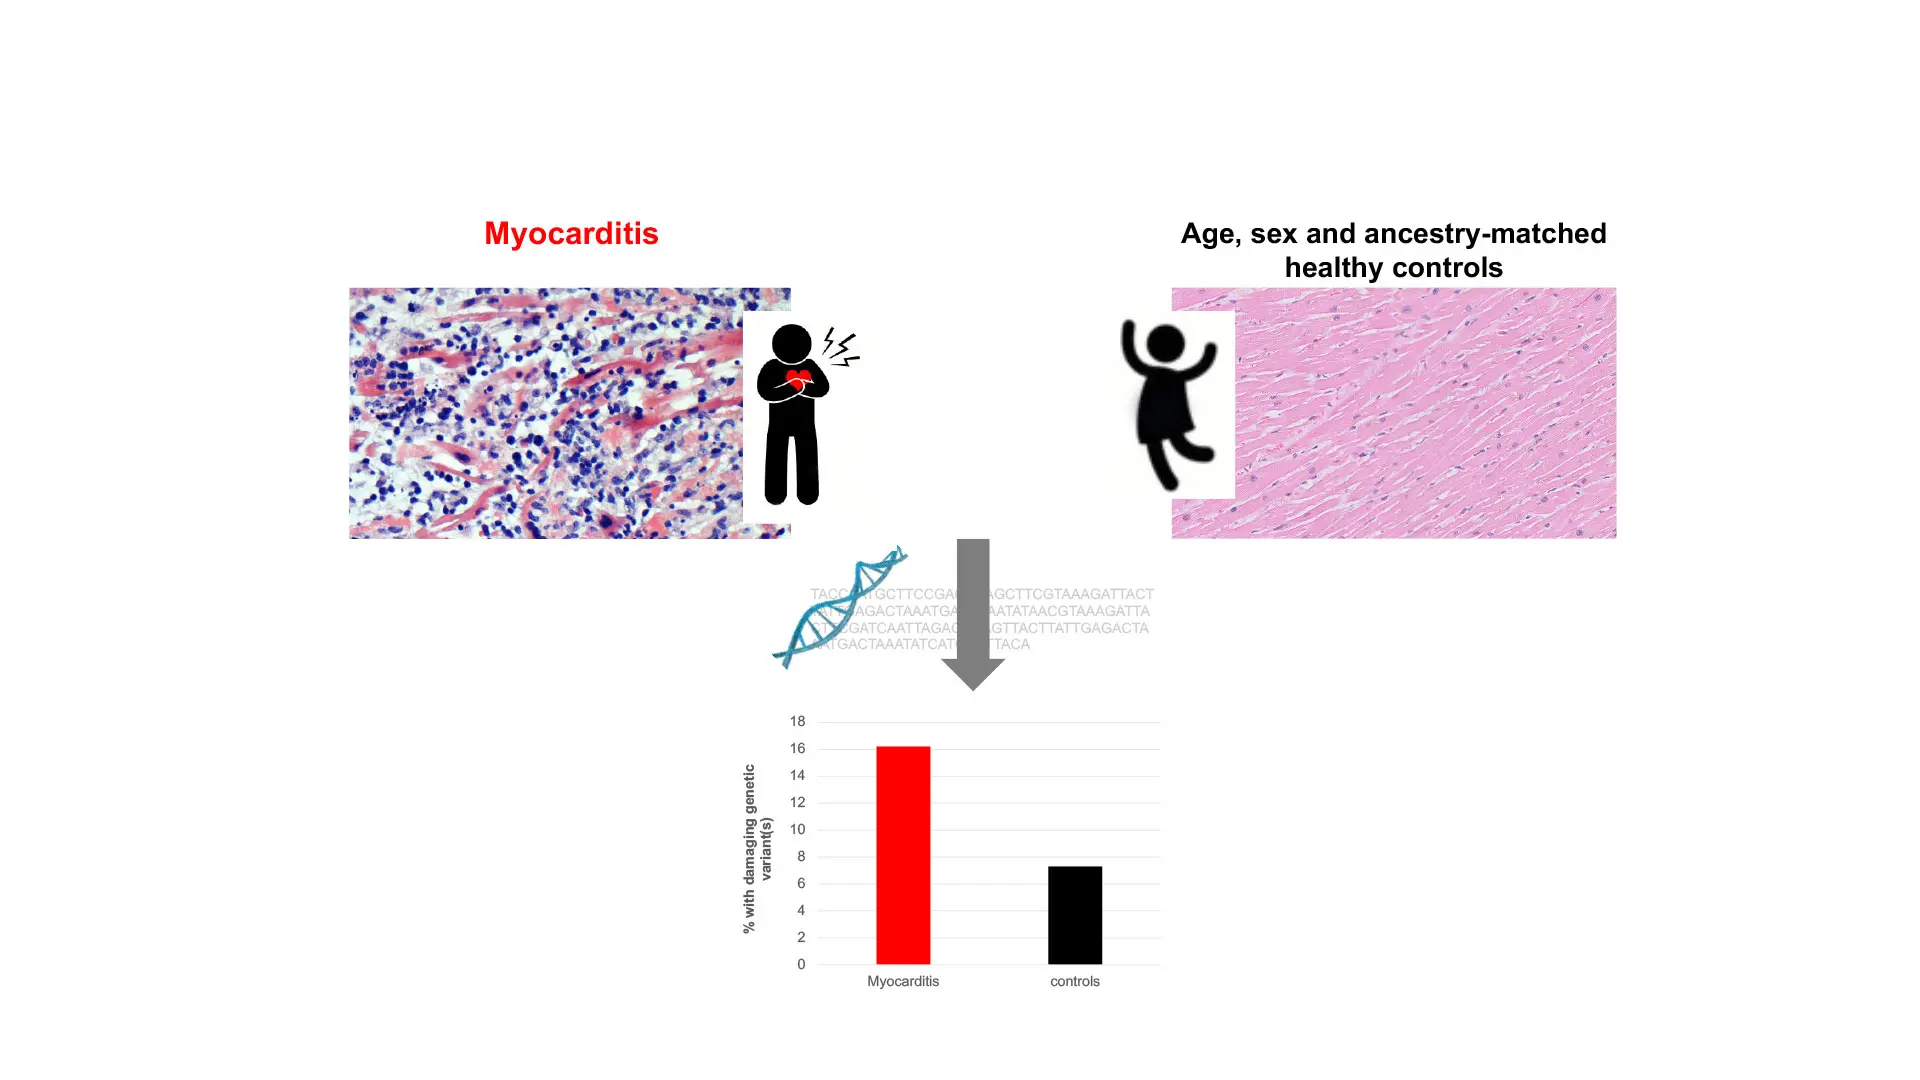 Groundbreaking studies at Mount Sinai have shown that patients presenting with acute myocarditis (AM), presumably precipitated by viral infections, are more likely to harbor damaging variants in cardiomyopathy genes than ancestry- and age-matched controls. This shows that AM can arise due to a predisposition in the host. 